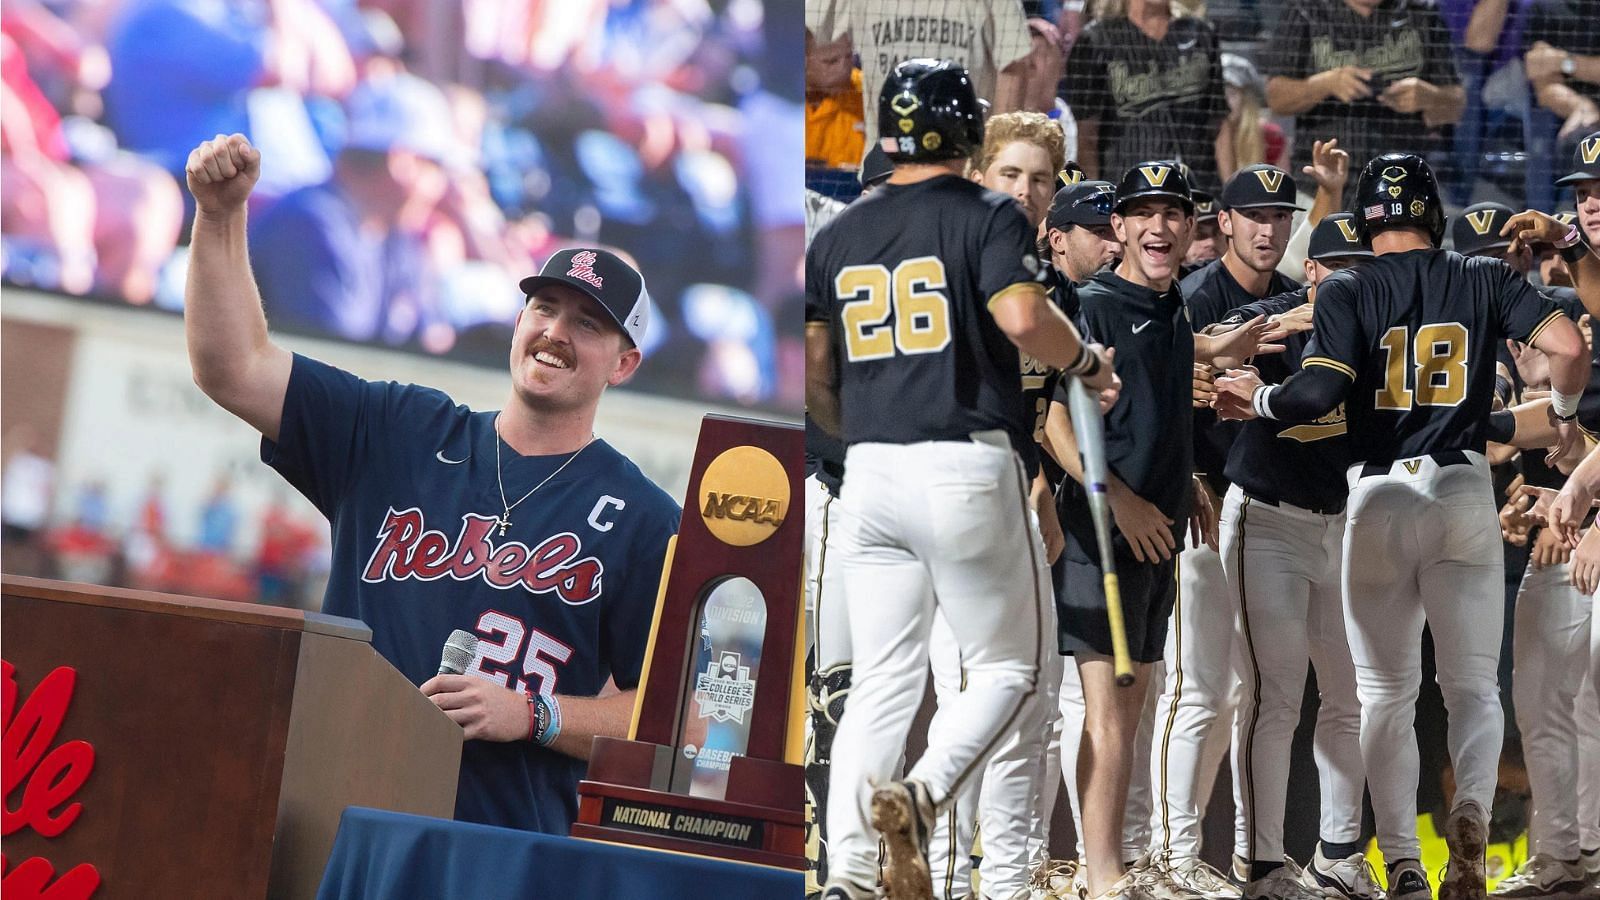 Ole Miss and Vanderbilt are two of the highest earning college baseball programs. 